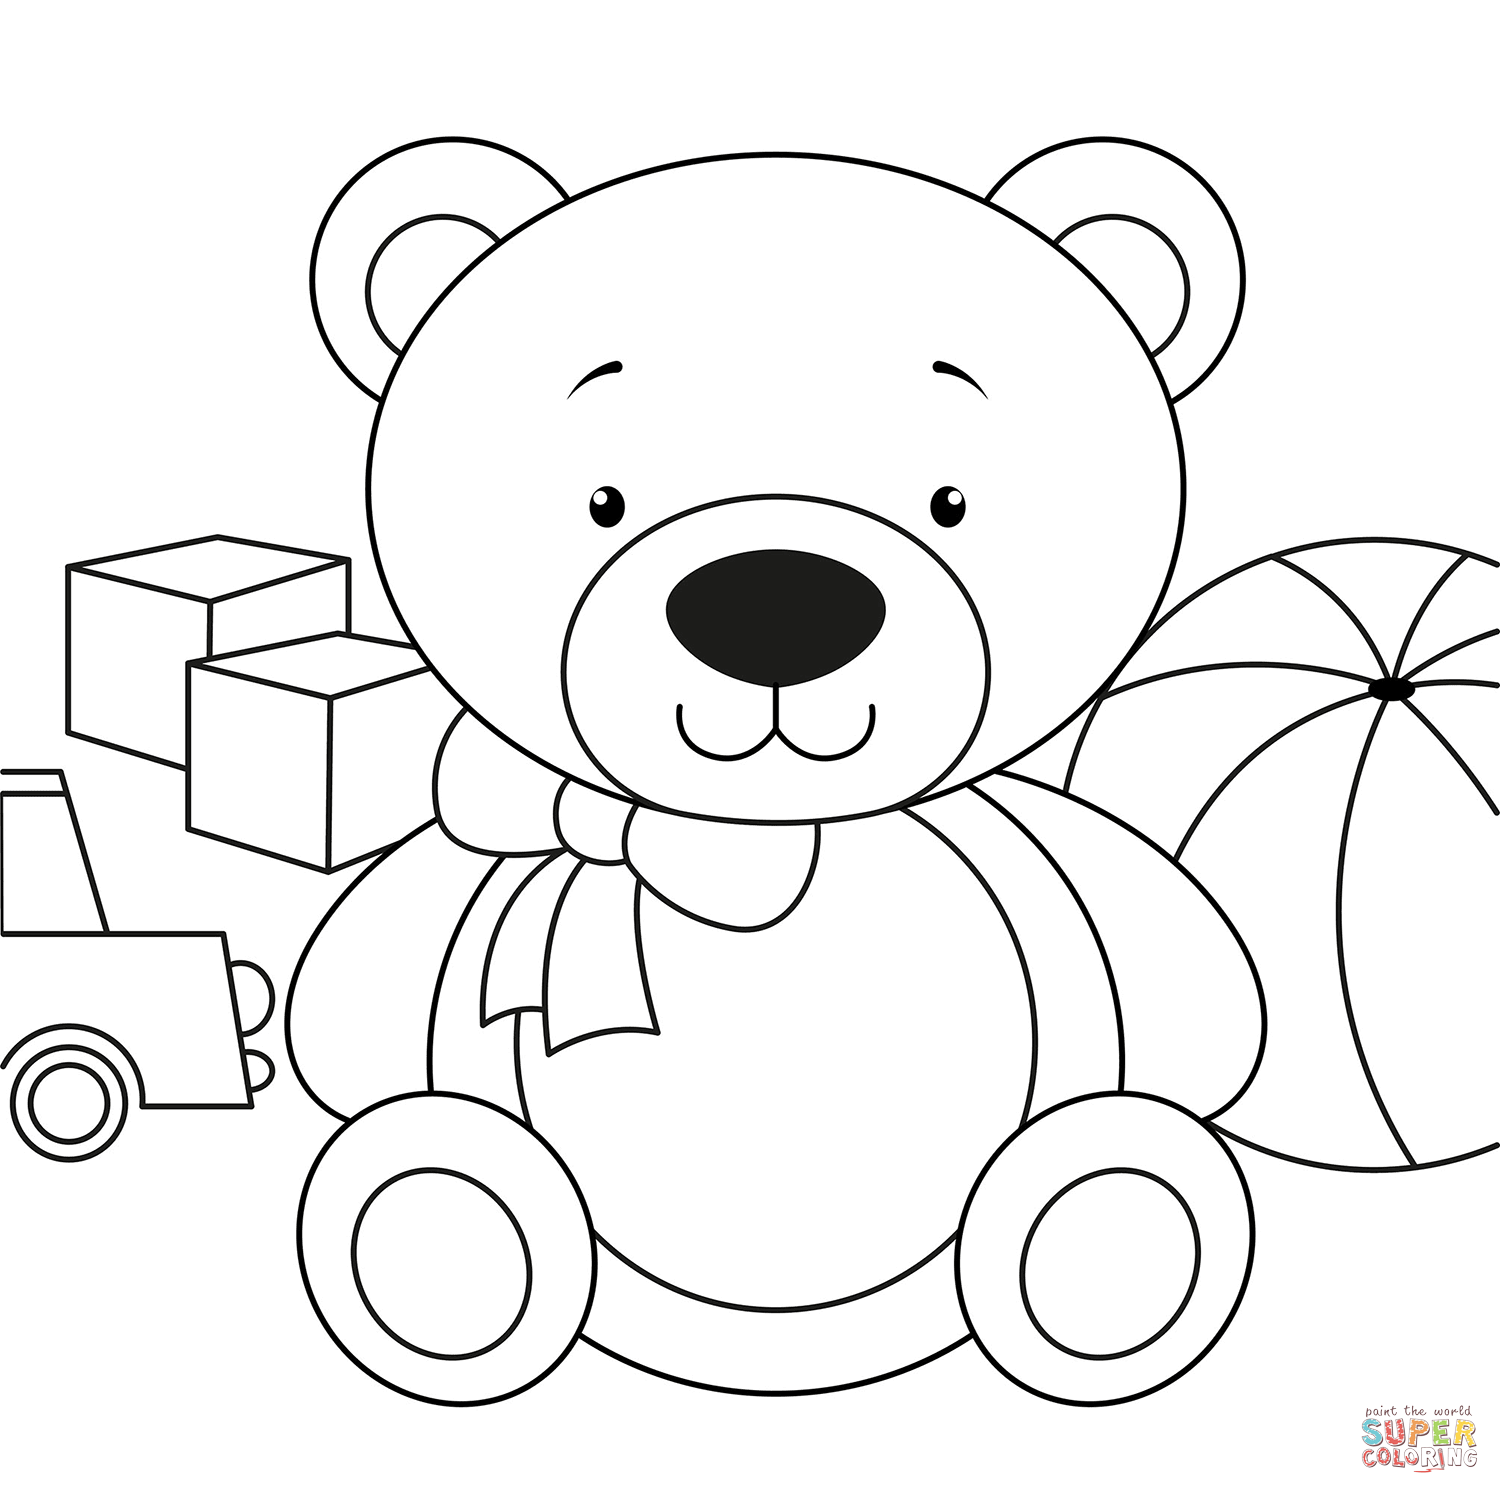 Cute teddy bear coloring page free printable coloring pages